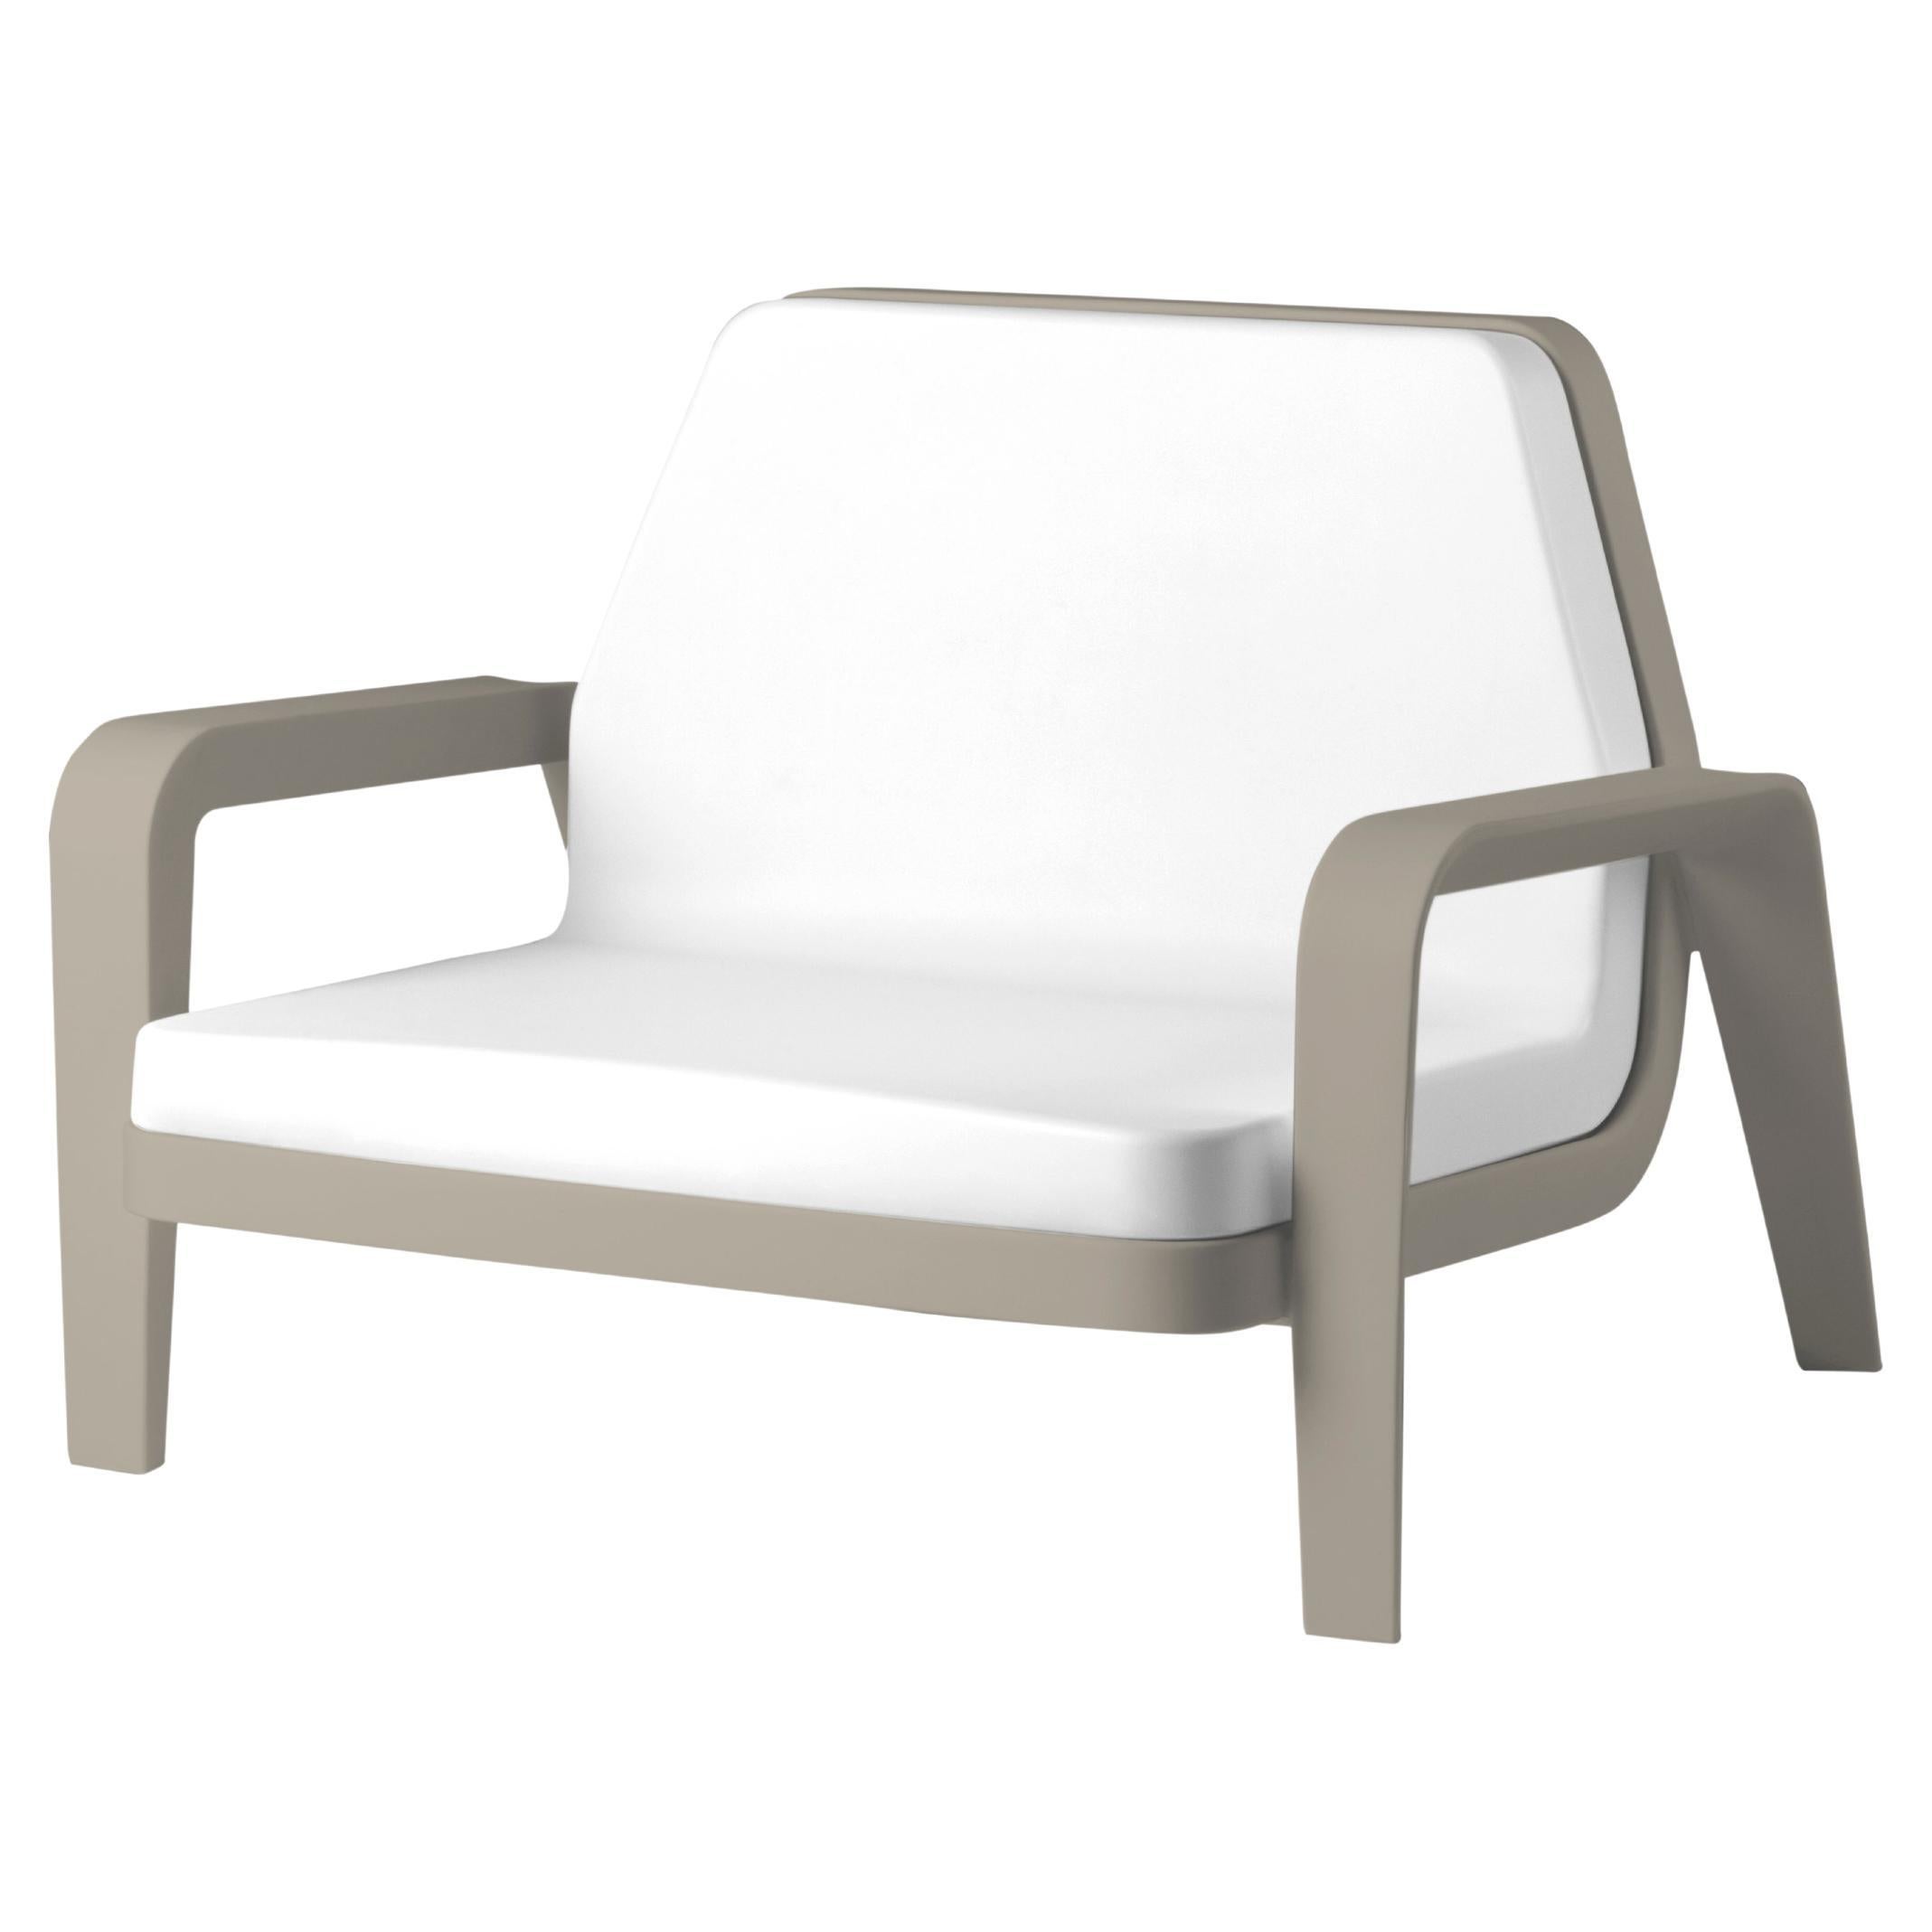 Slide Design America Armchair in Soft White Fabric with Dove Gray Frame For Sale